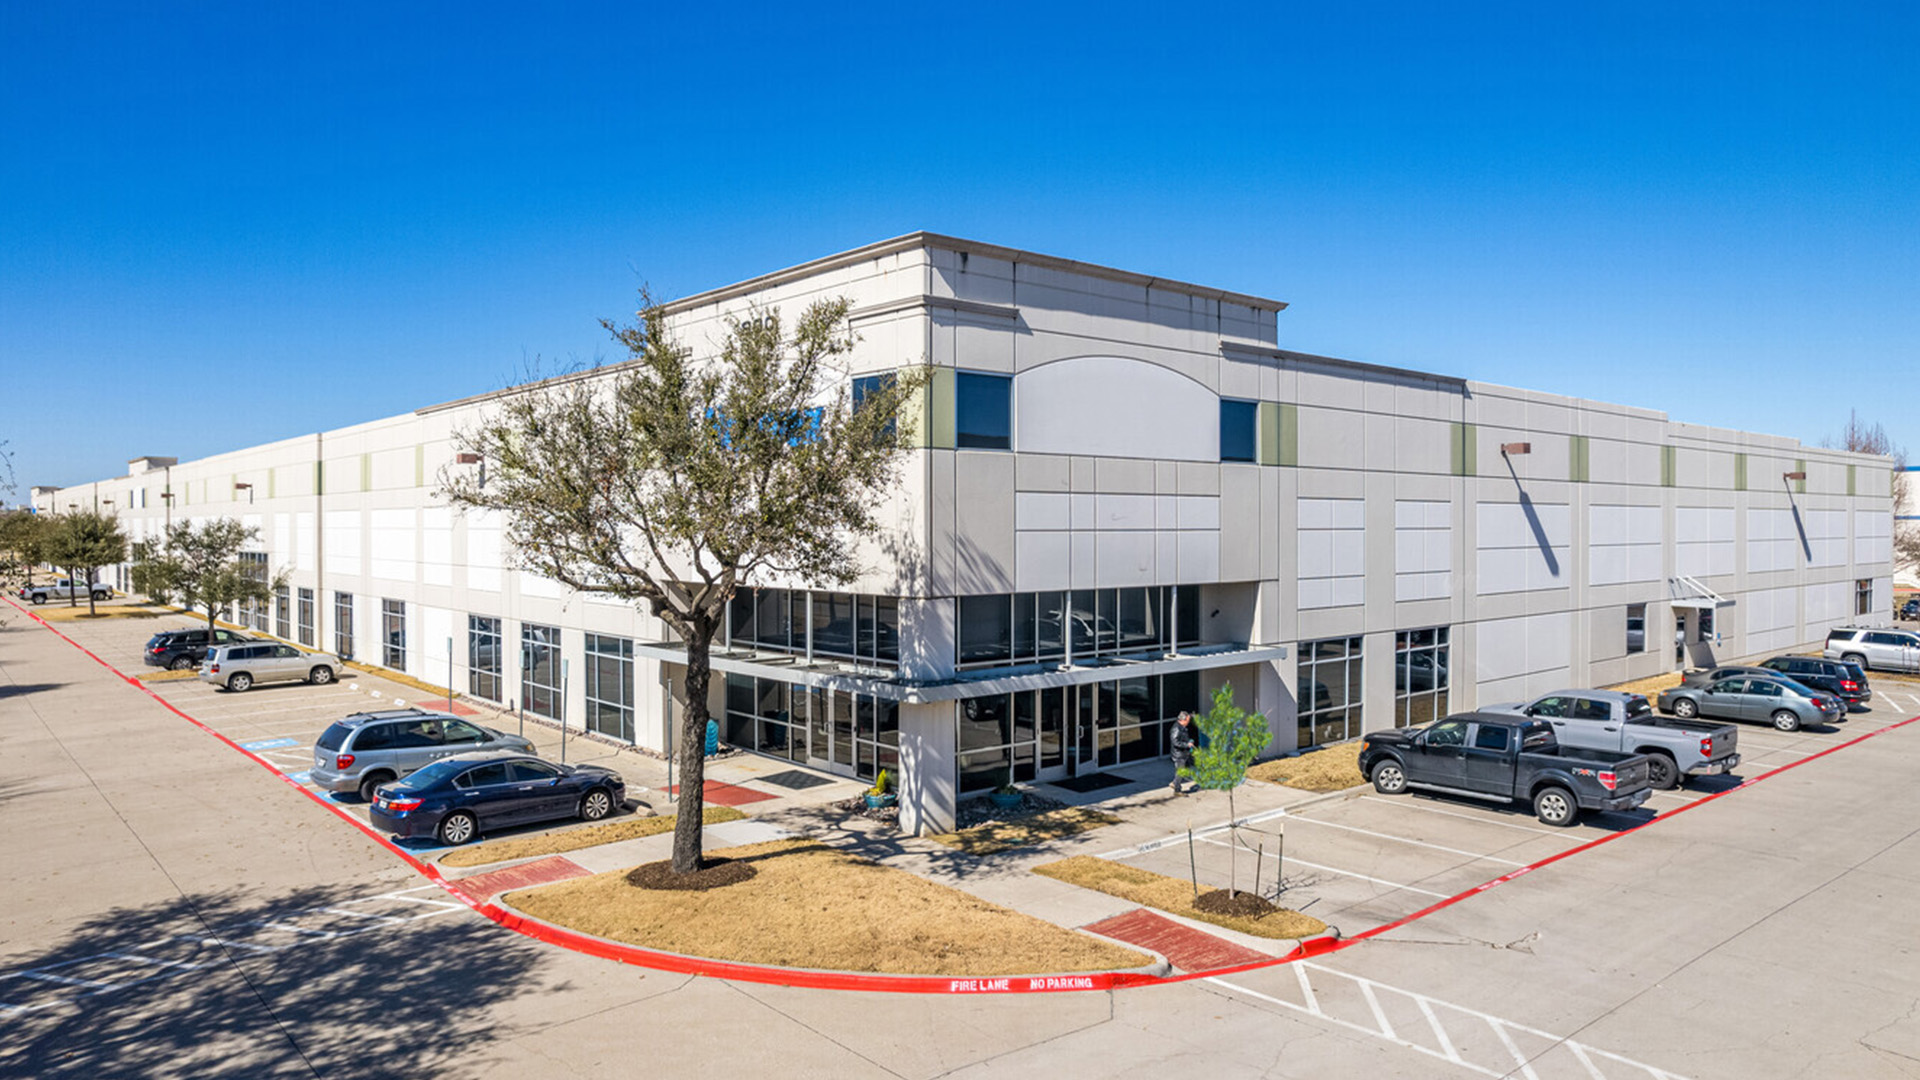 800 W Bethel Coppell, TX Building View